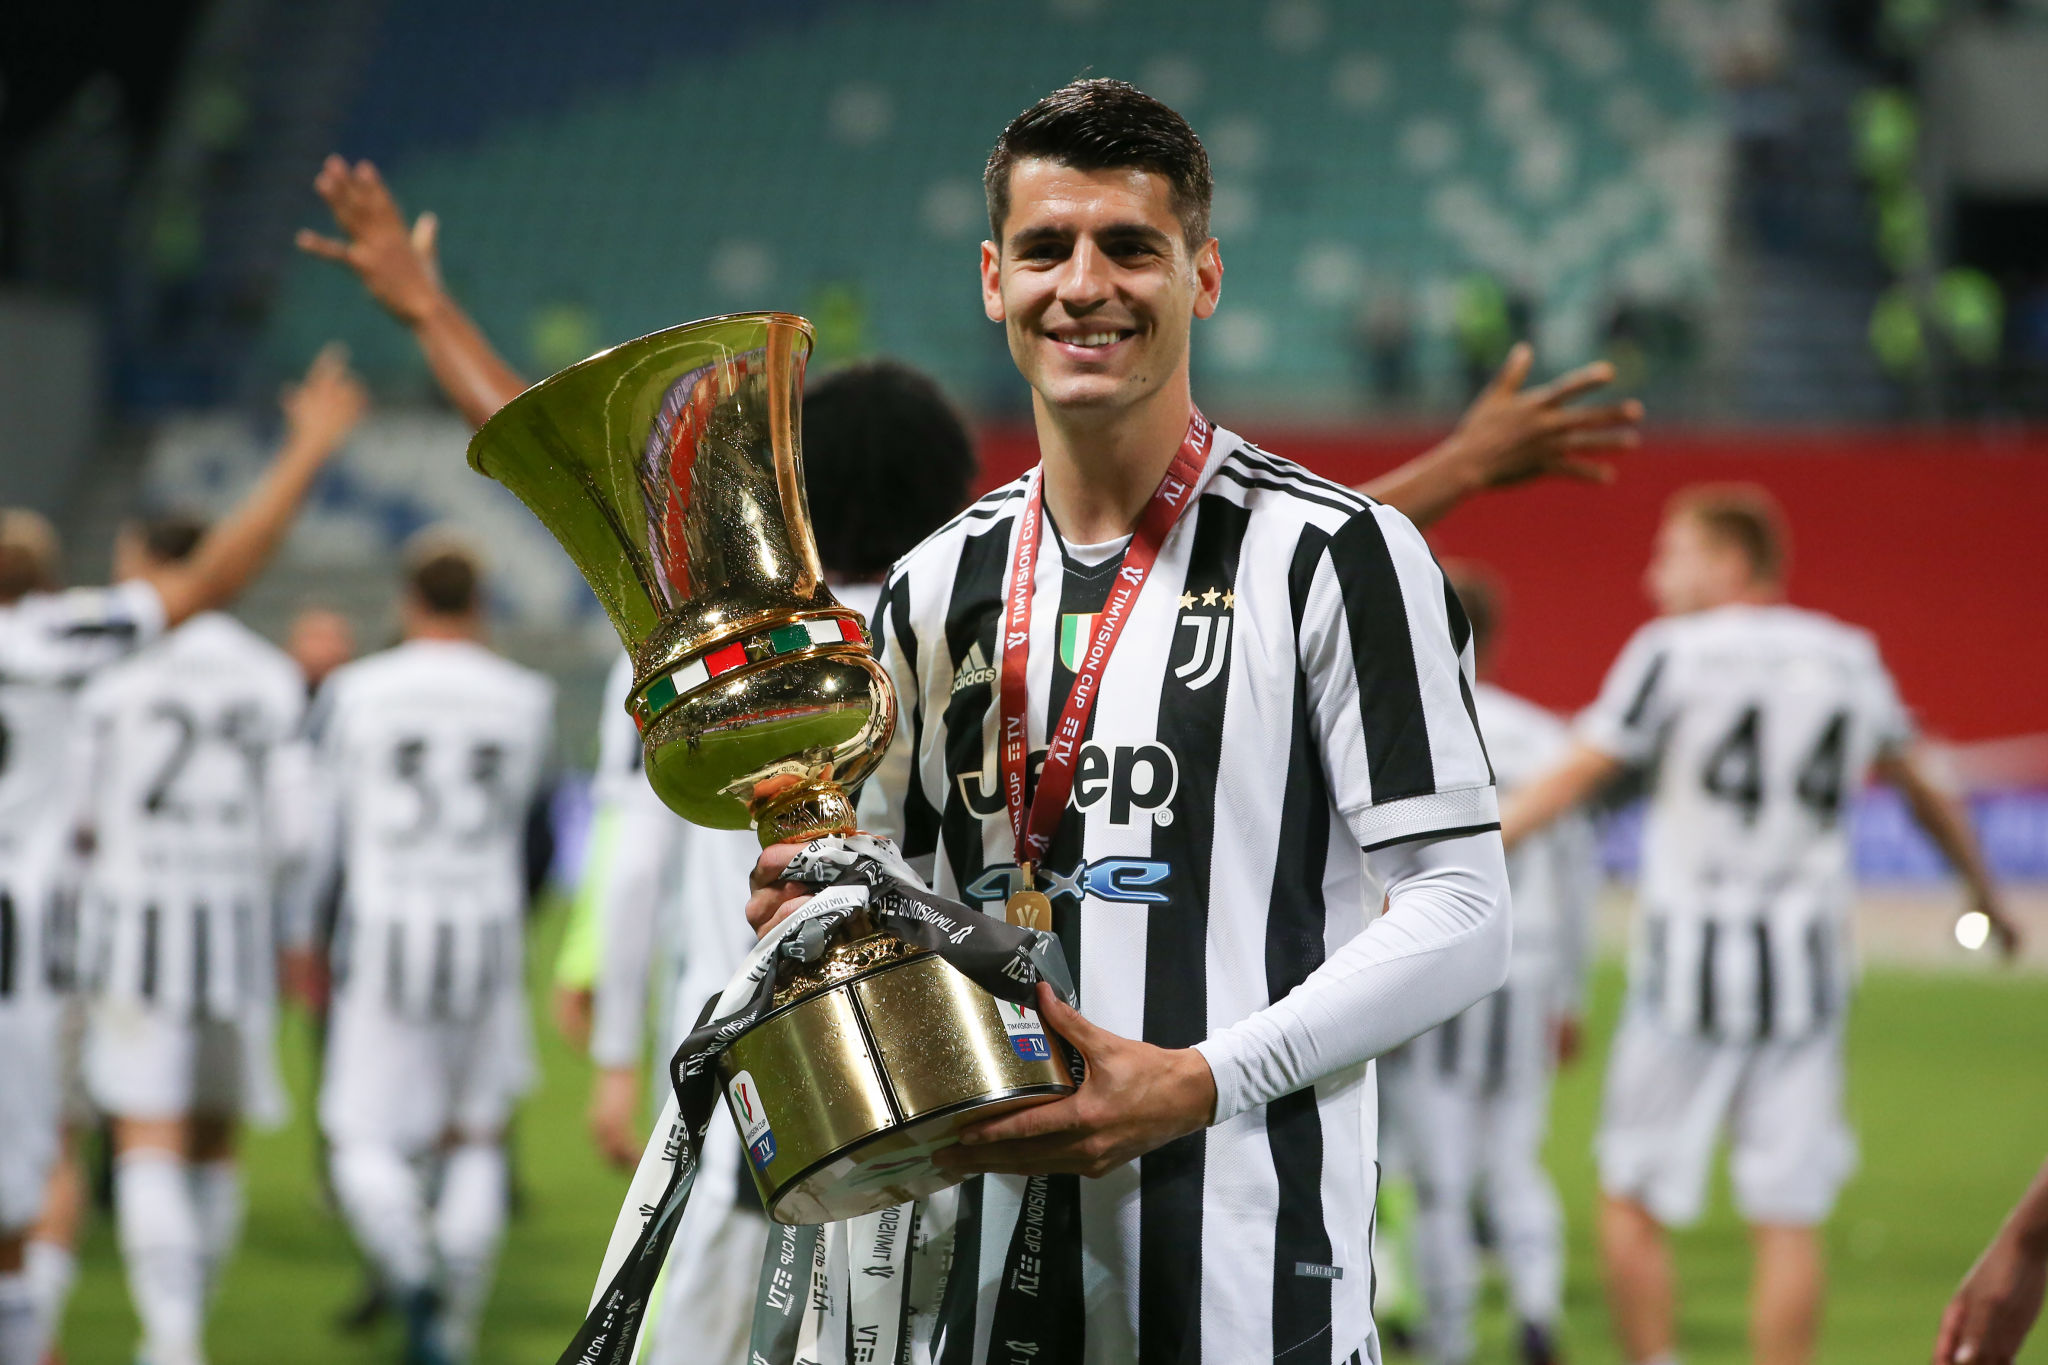 Alvaro Morata being sent back to Atletico Madrid by Juventus after loan move